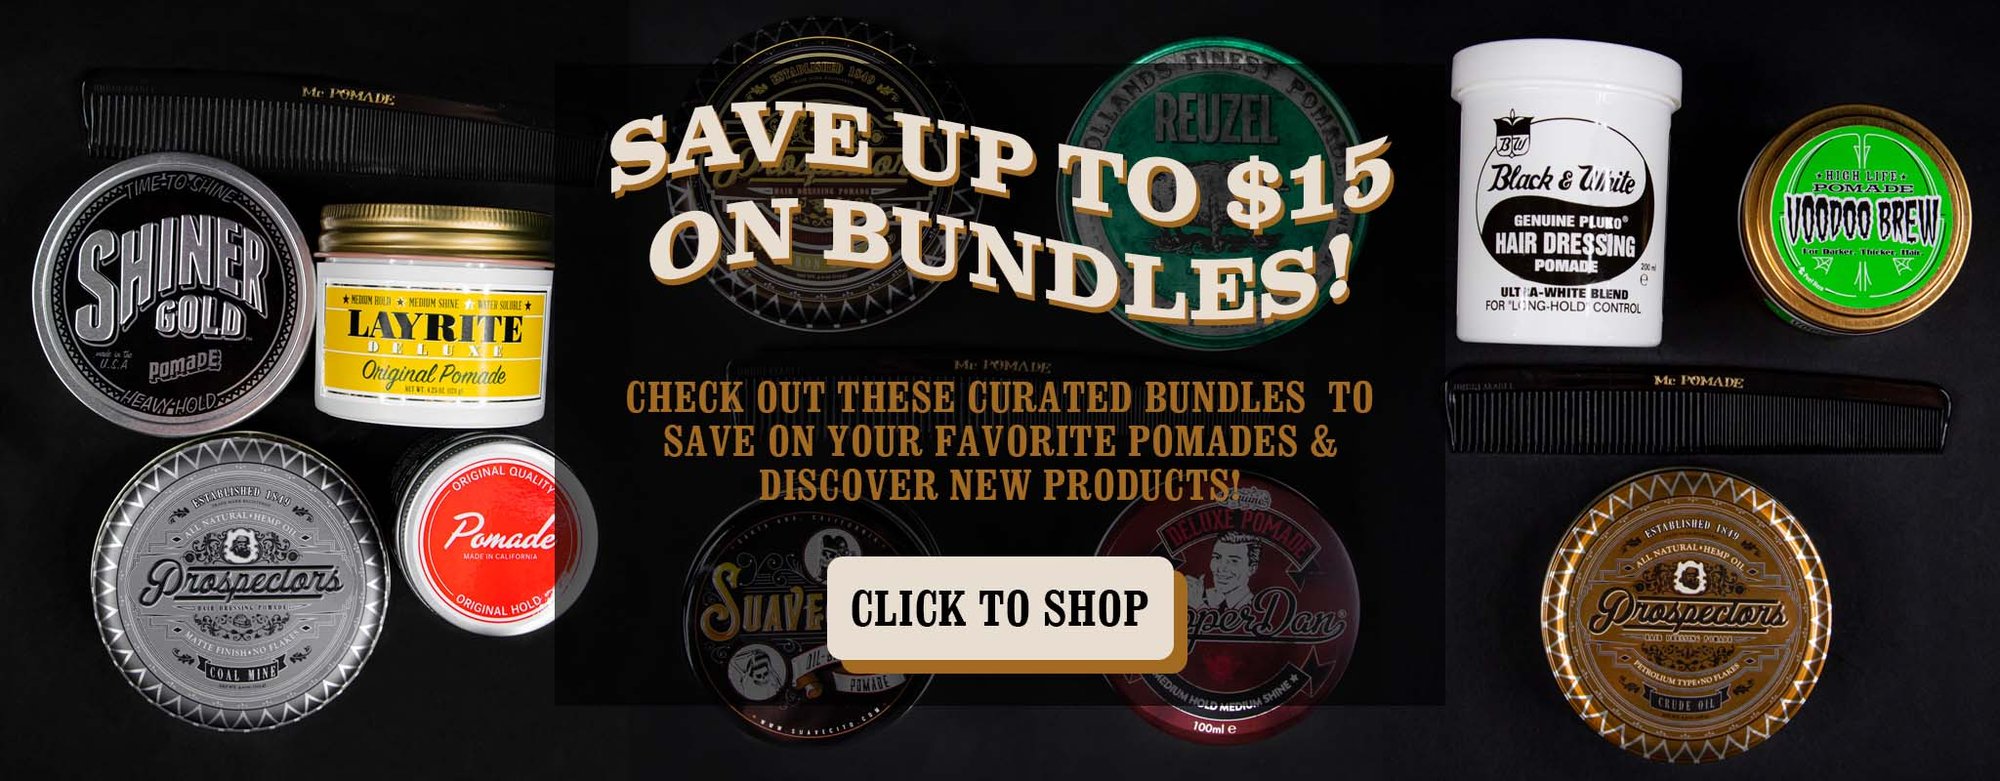 Save up to $15 on bundles! Check out these curated bundles to save on your favorite pomades & discover new products!